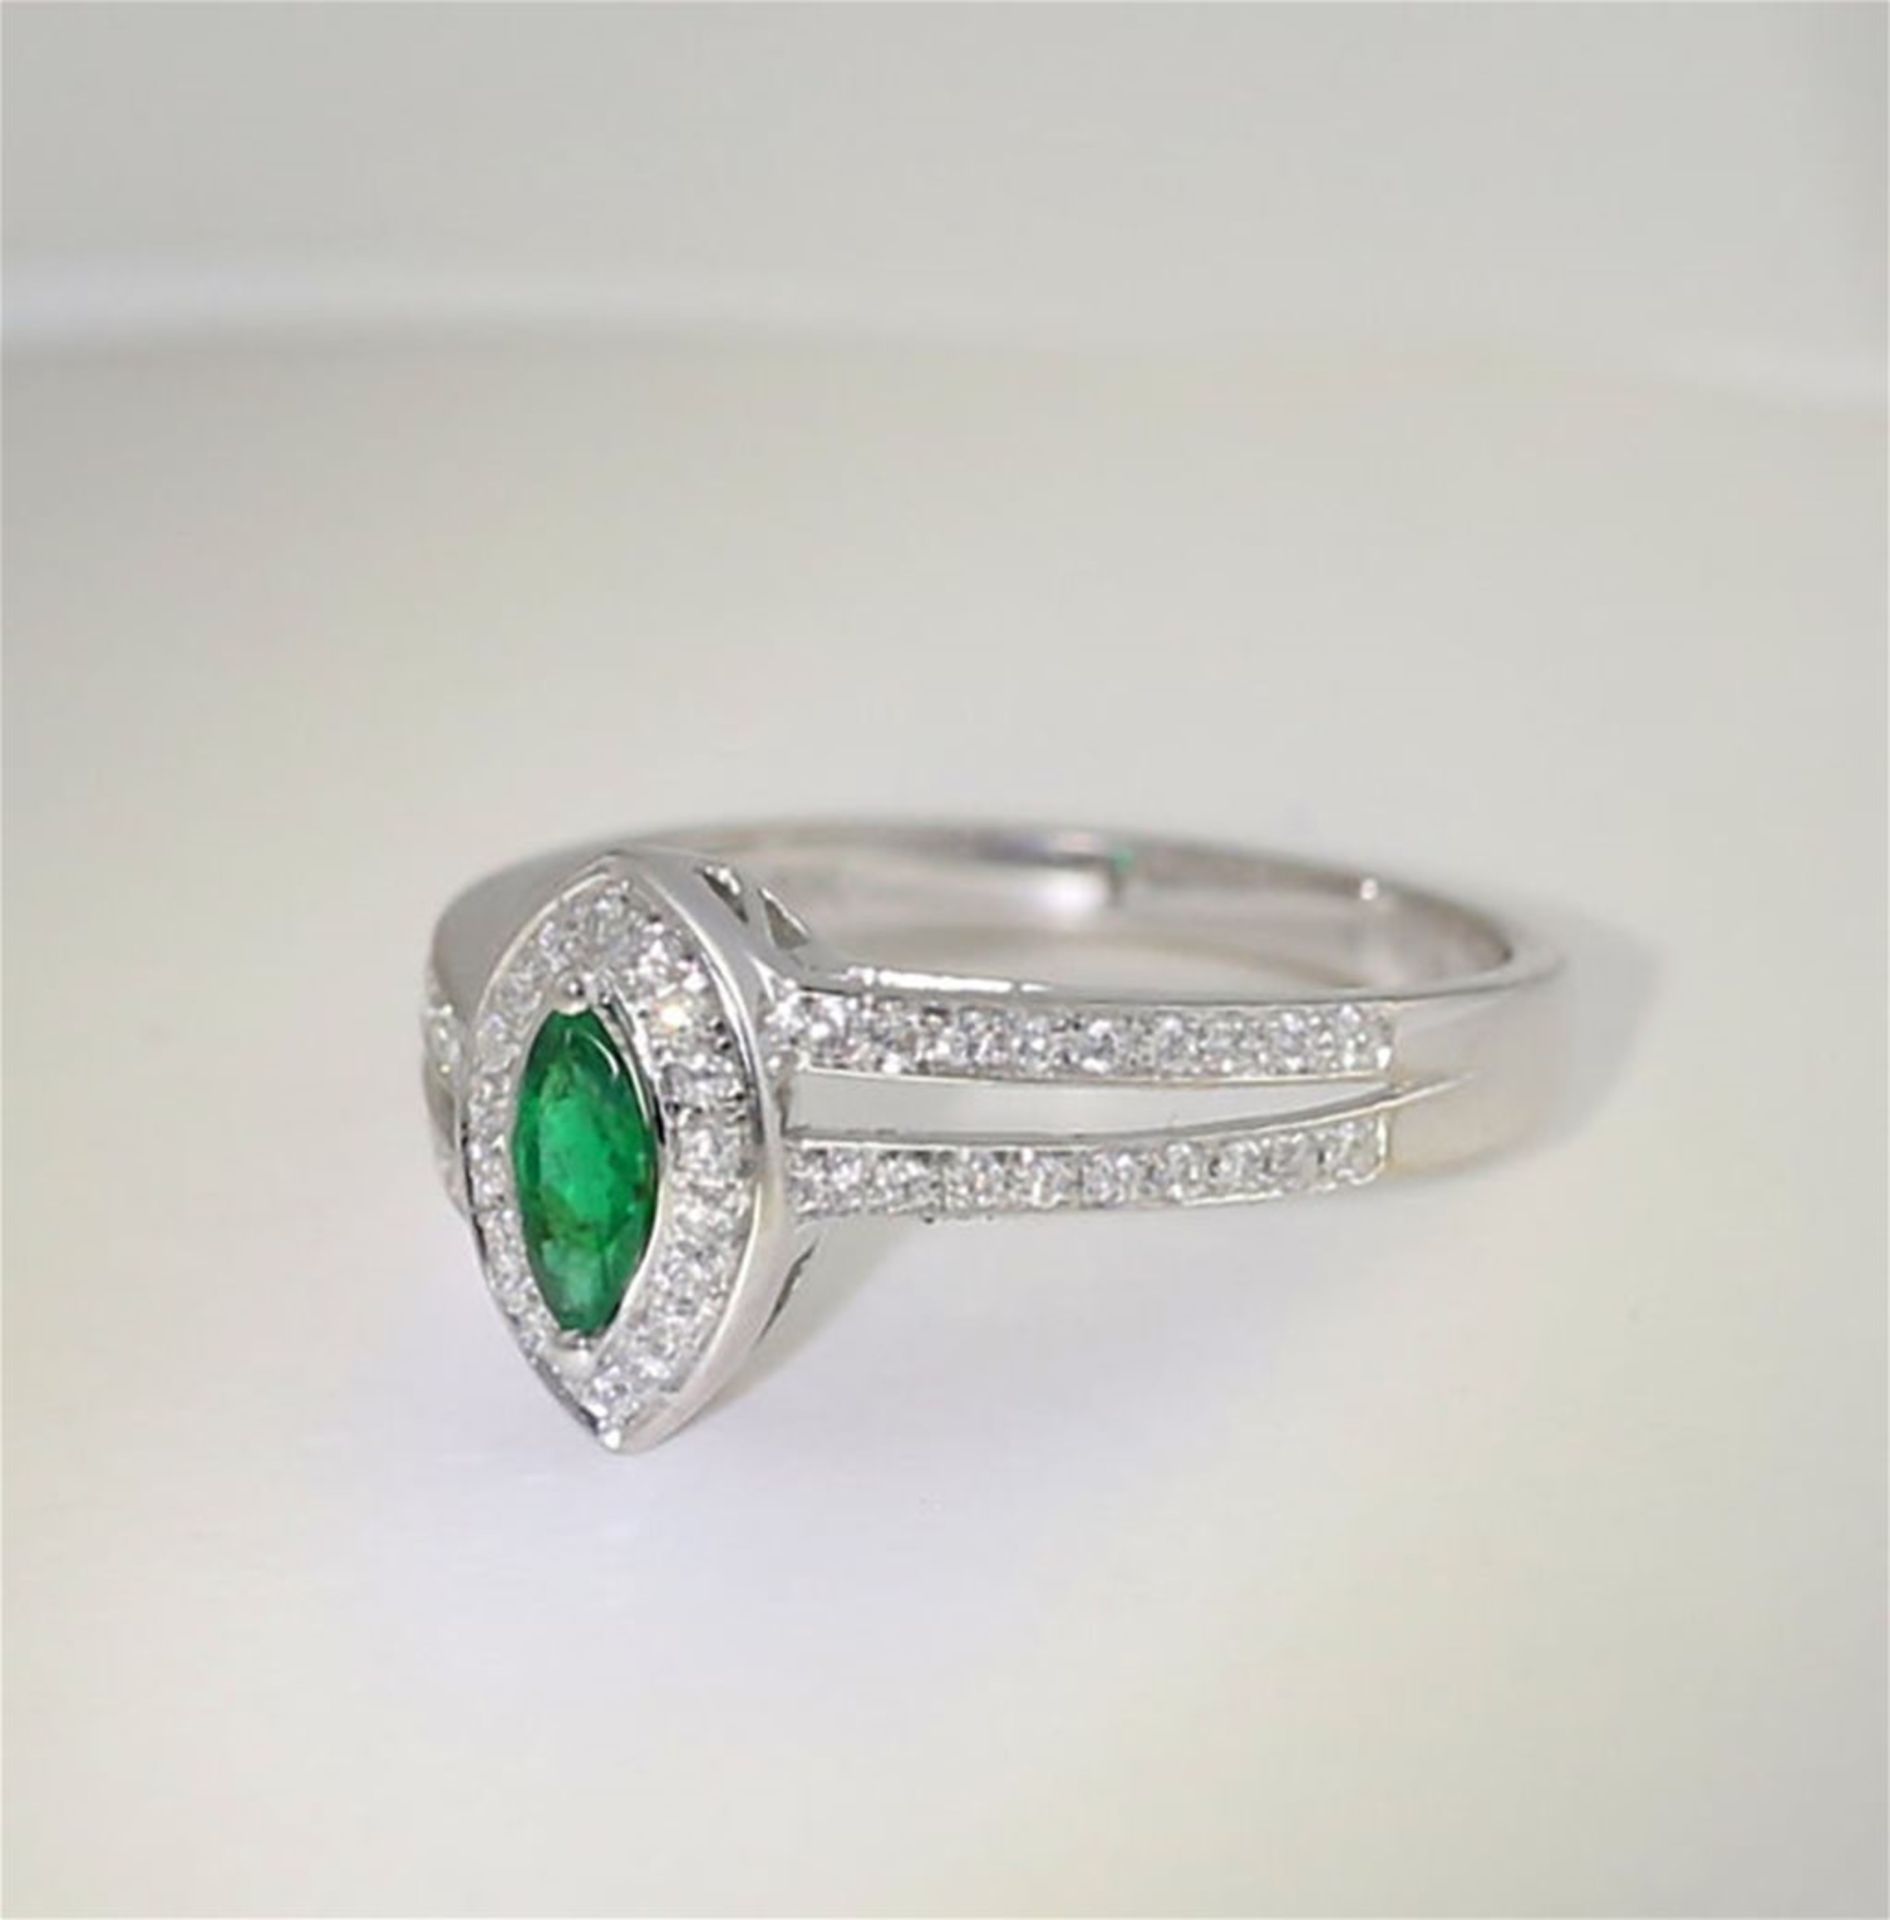 18 K / 750 White Gold Emerald and Diamond Ring - Image 3 of 6